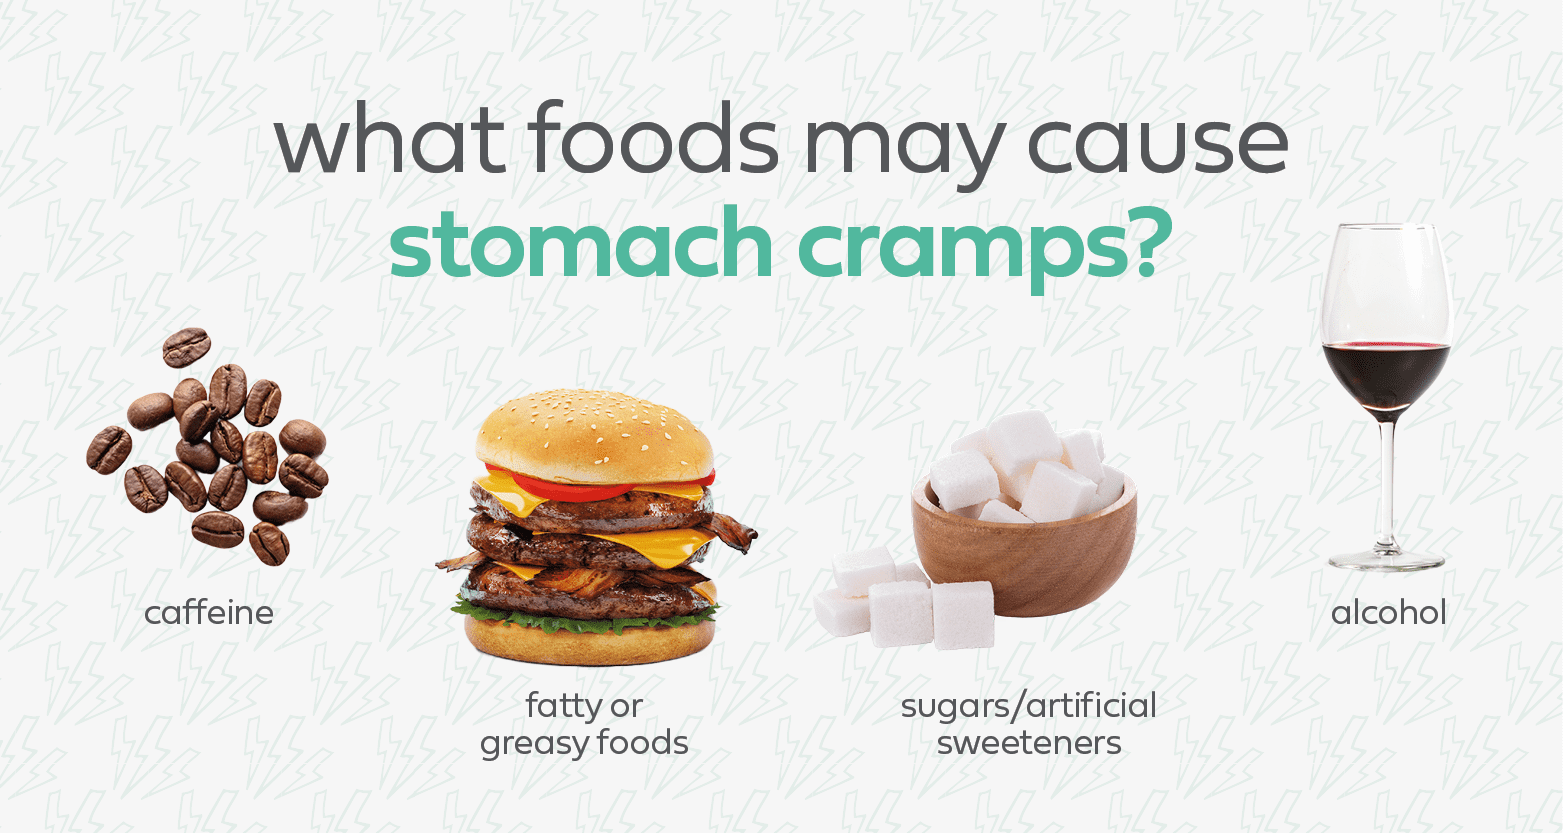 Foods that can cause stomach cramps